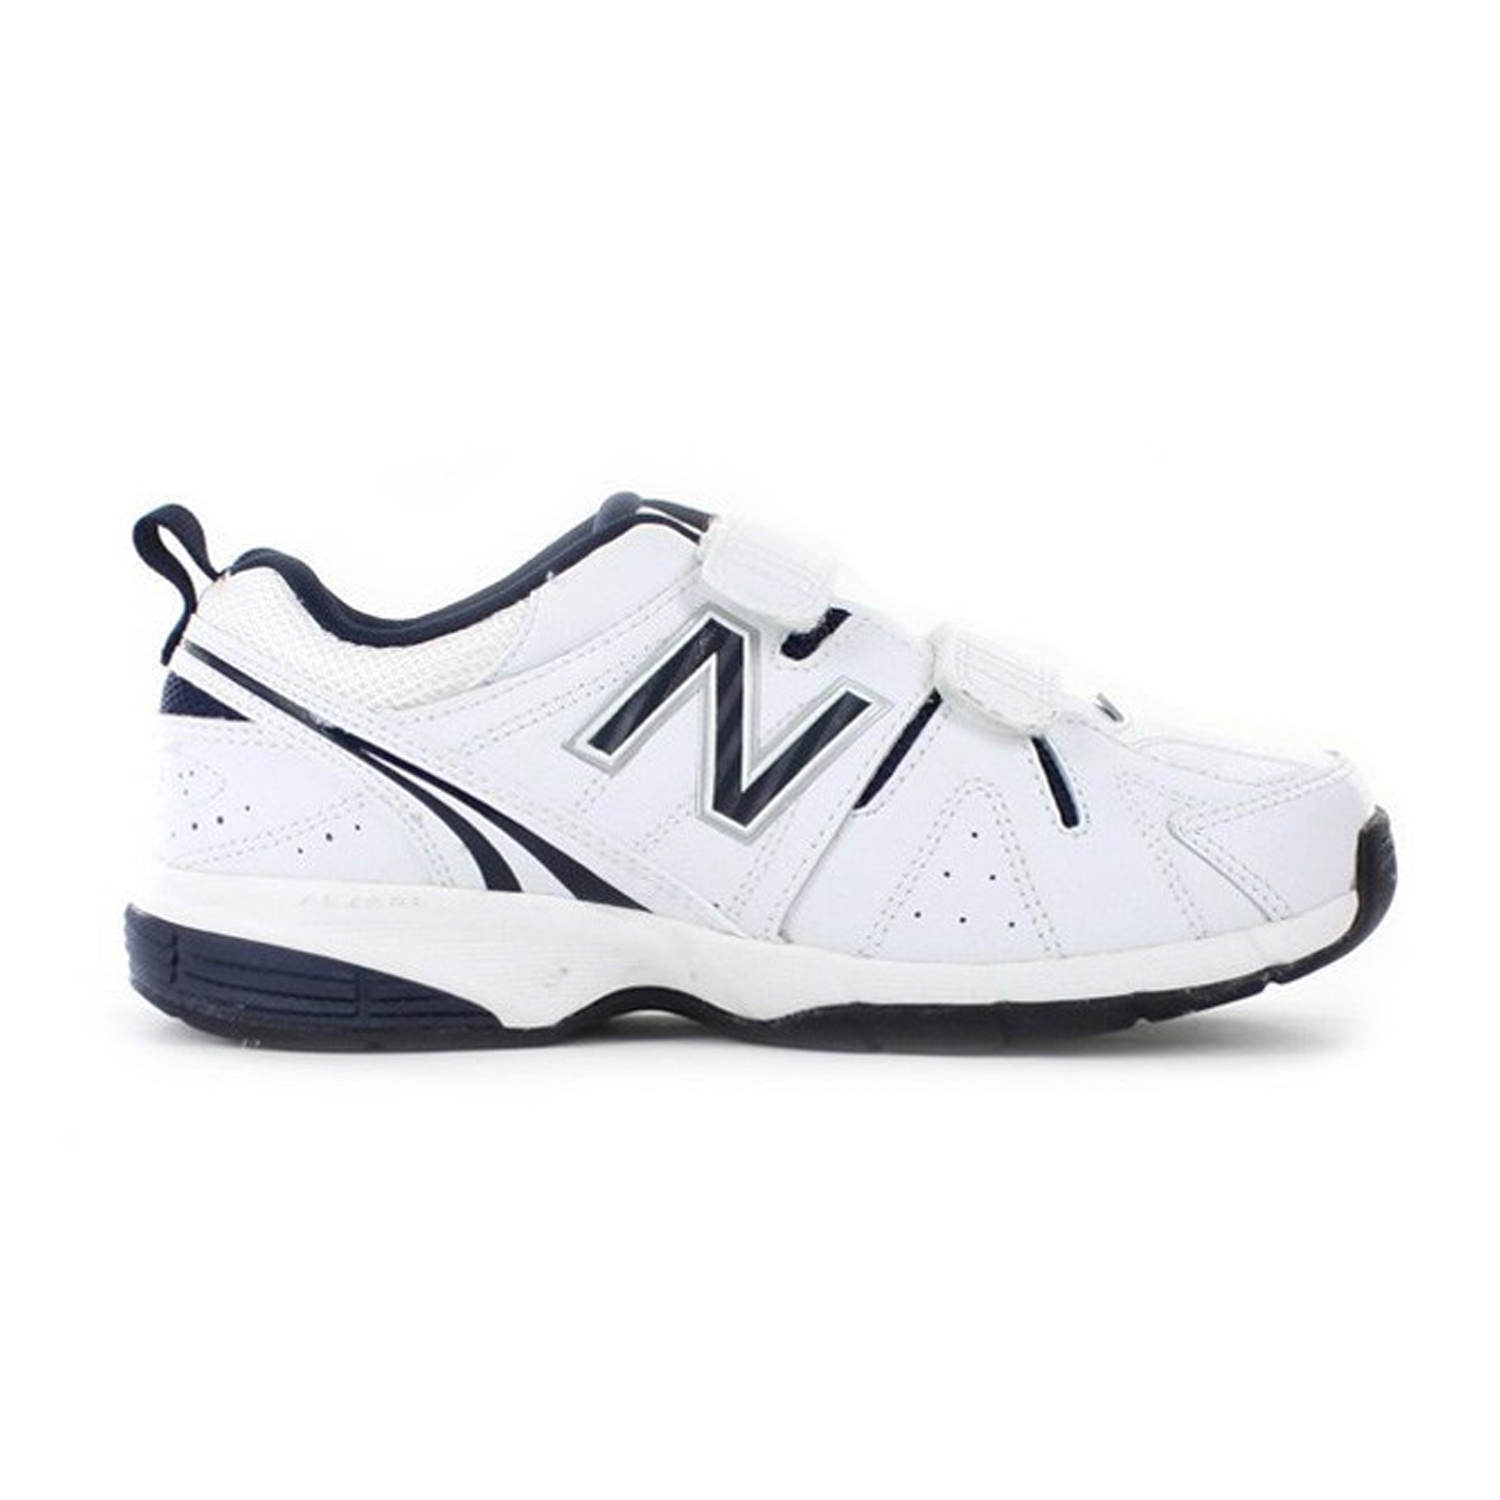 Impermeable Perth tetraedro New Balance 625 v2 (Velcro) (Wide) Kids Cross Training Shoes: White/Navy:  US 2 | Mike Pawley Sports